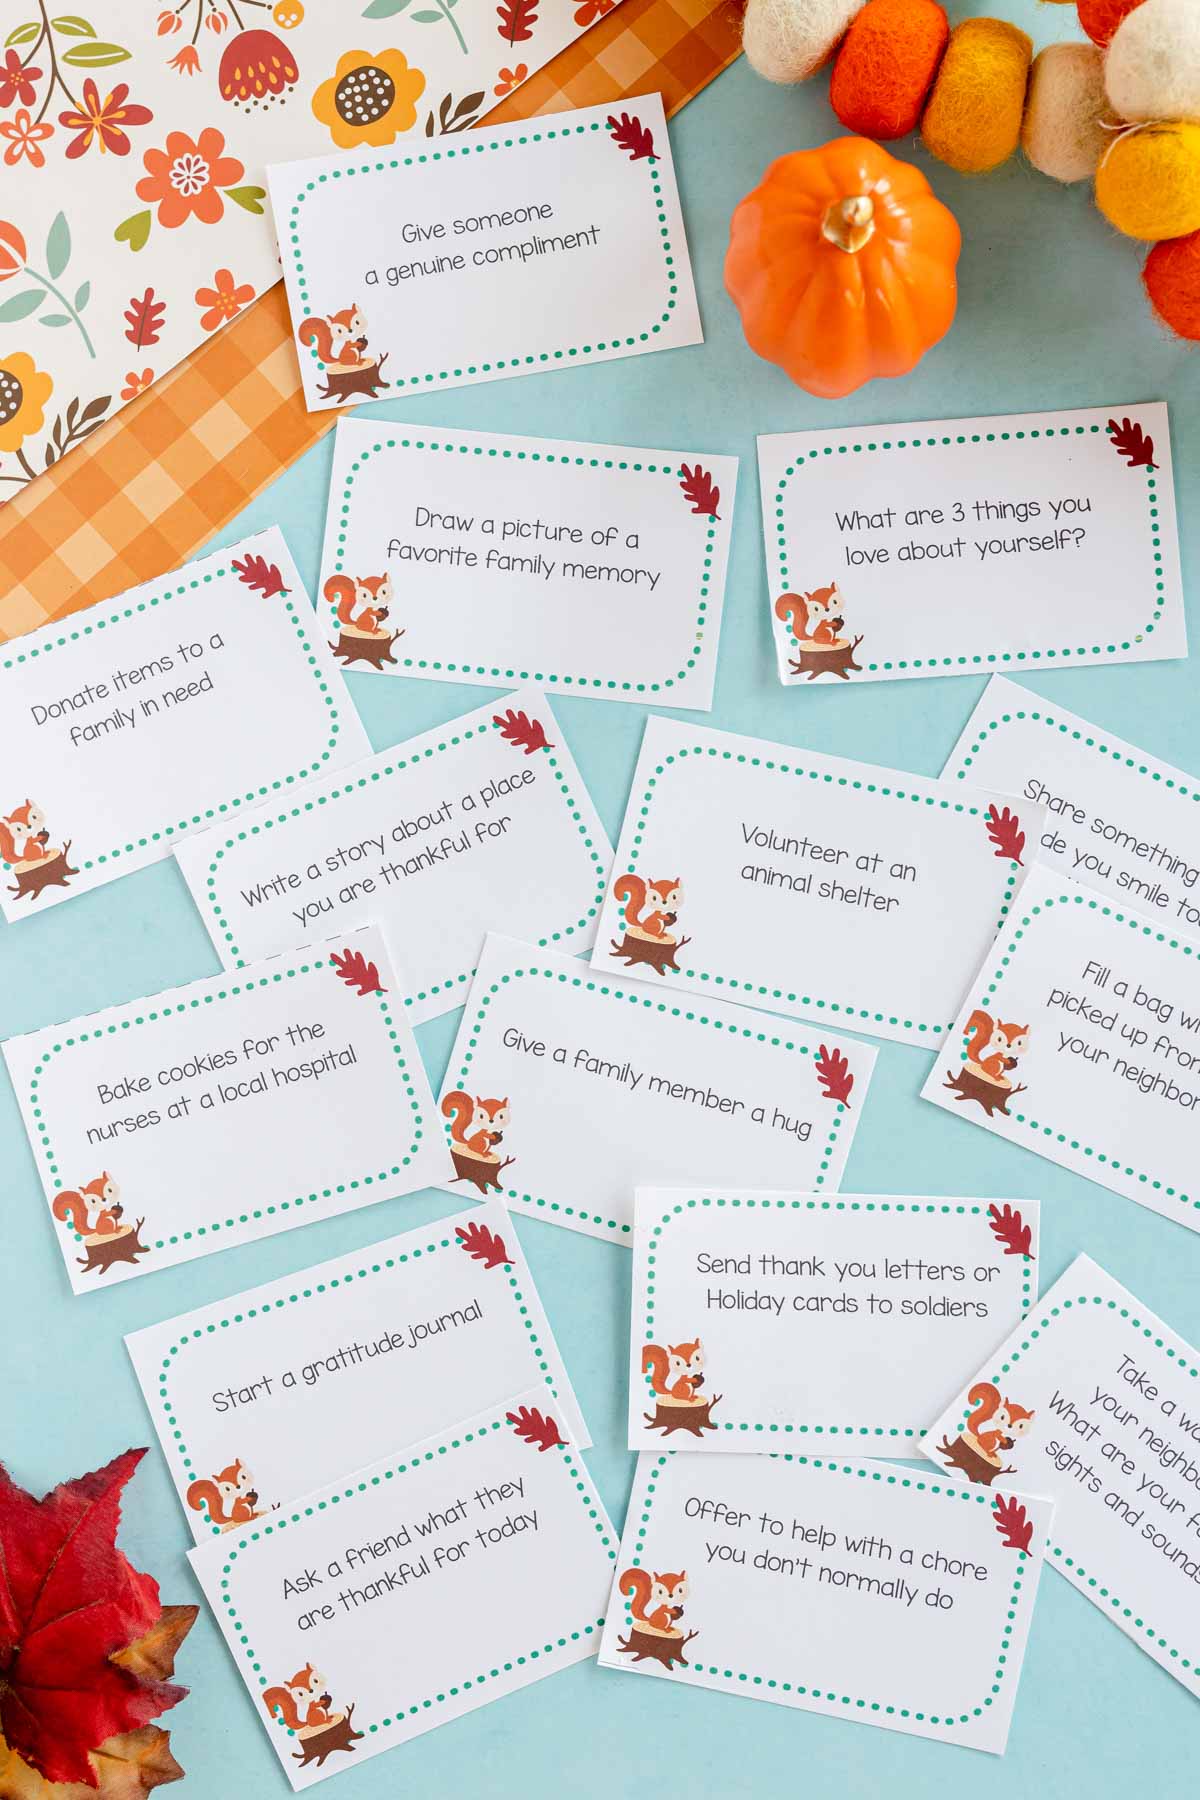 printed out cards with gratitude activities for kids